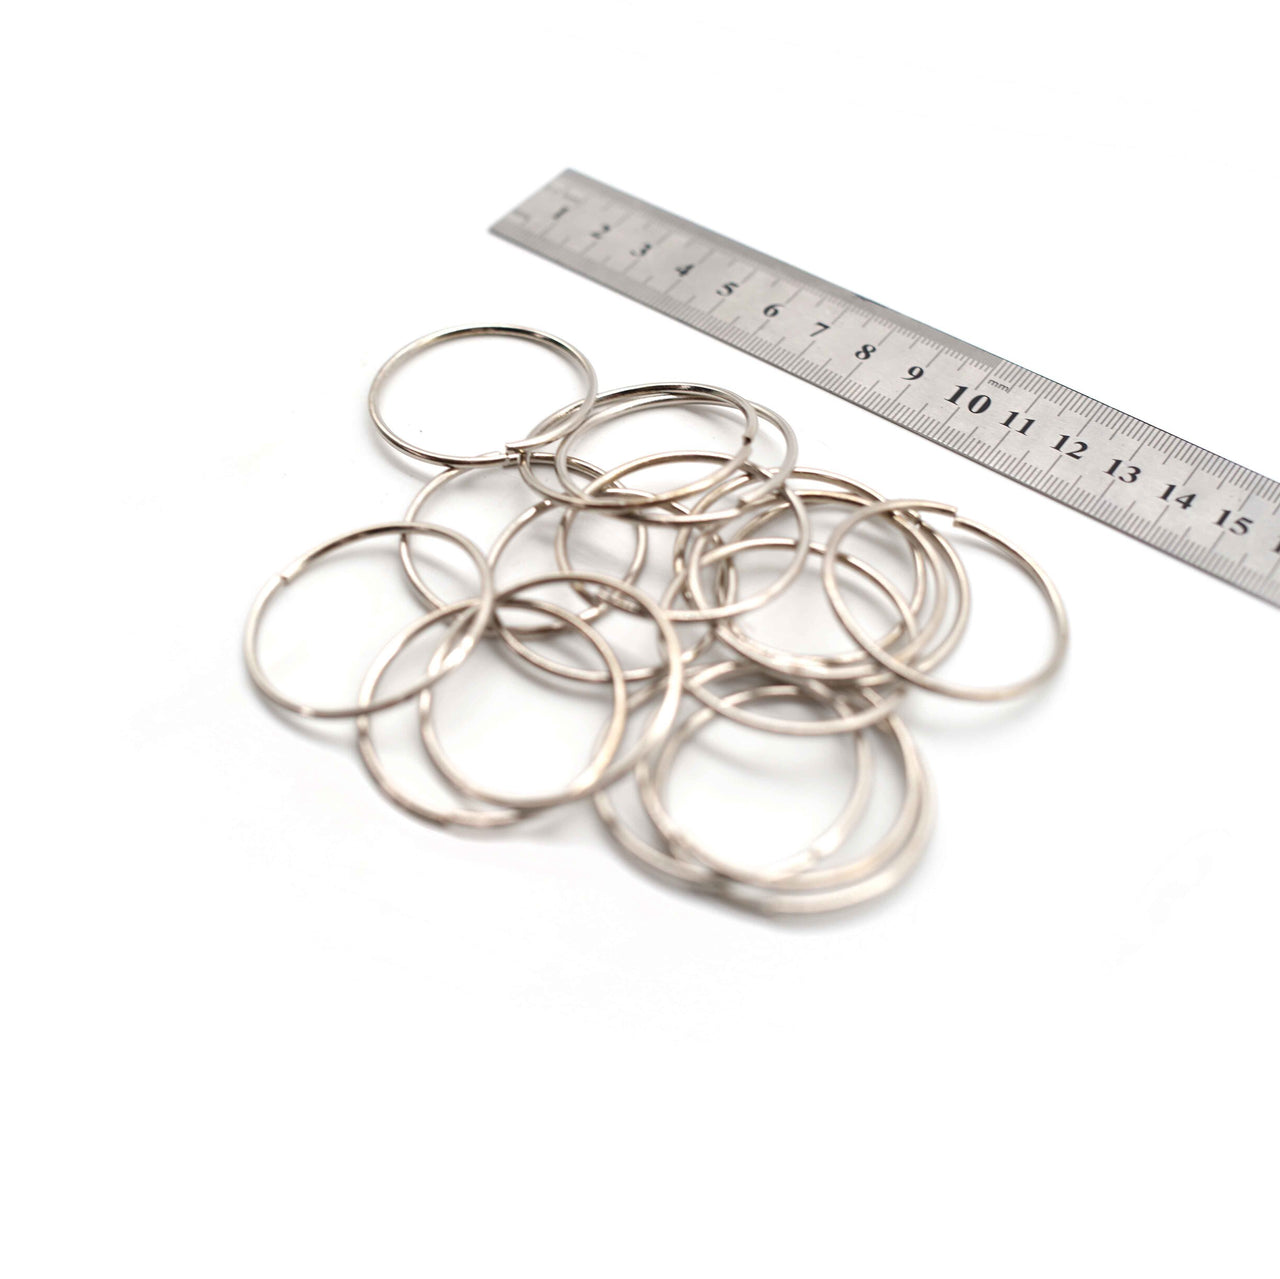 O Rings - 40mm - Silver - Pack of 10 (Thin)